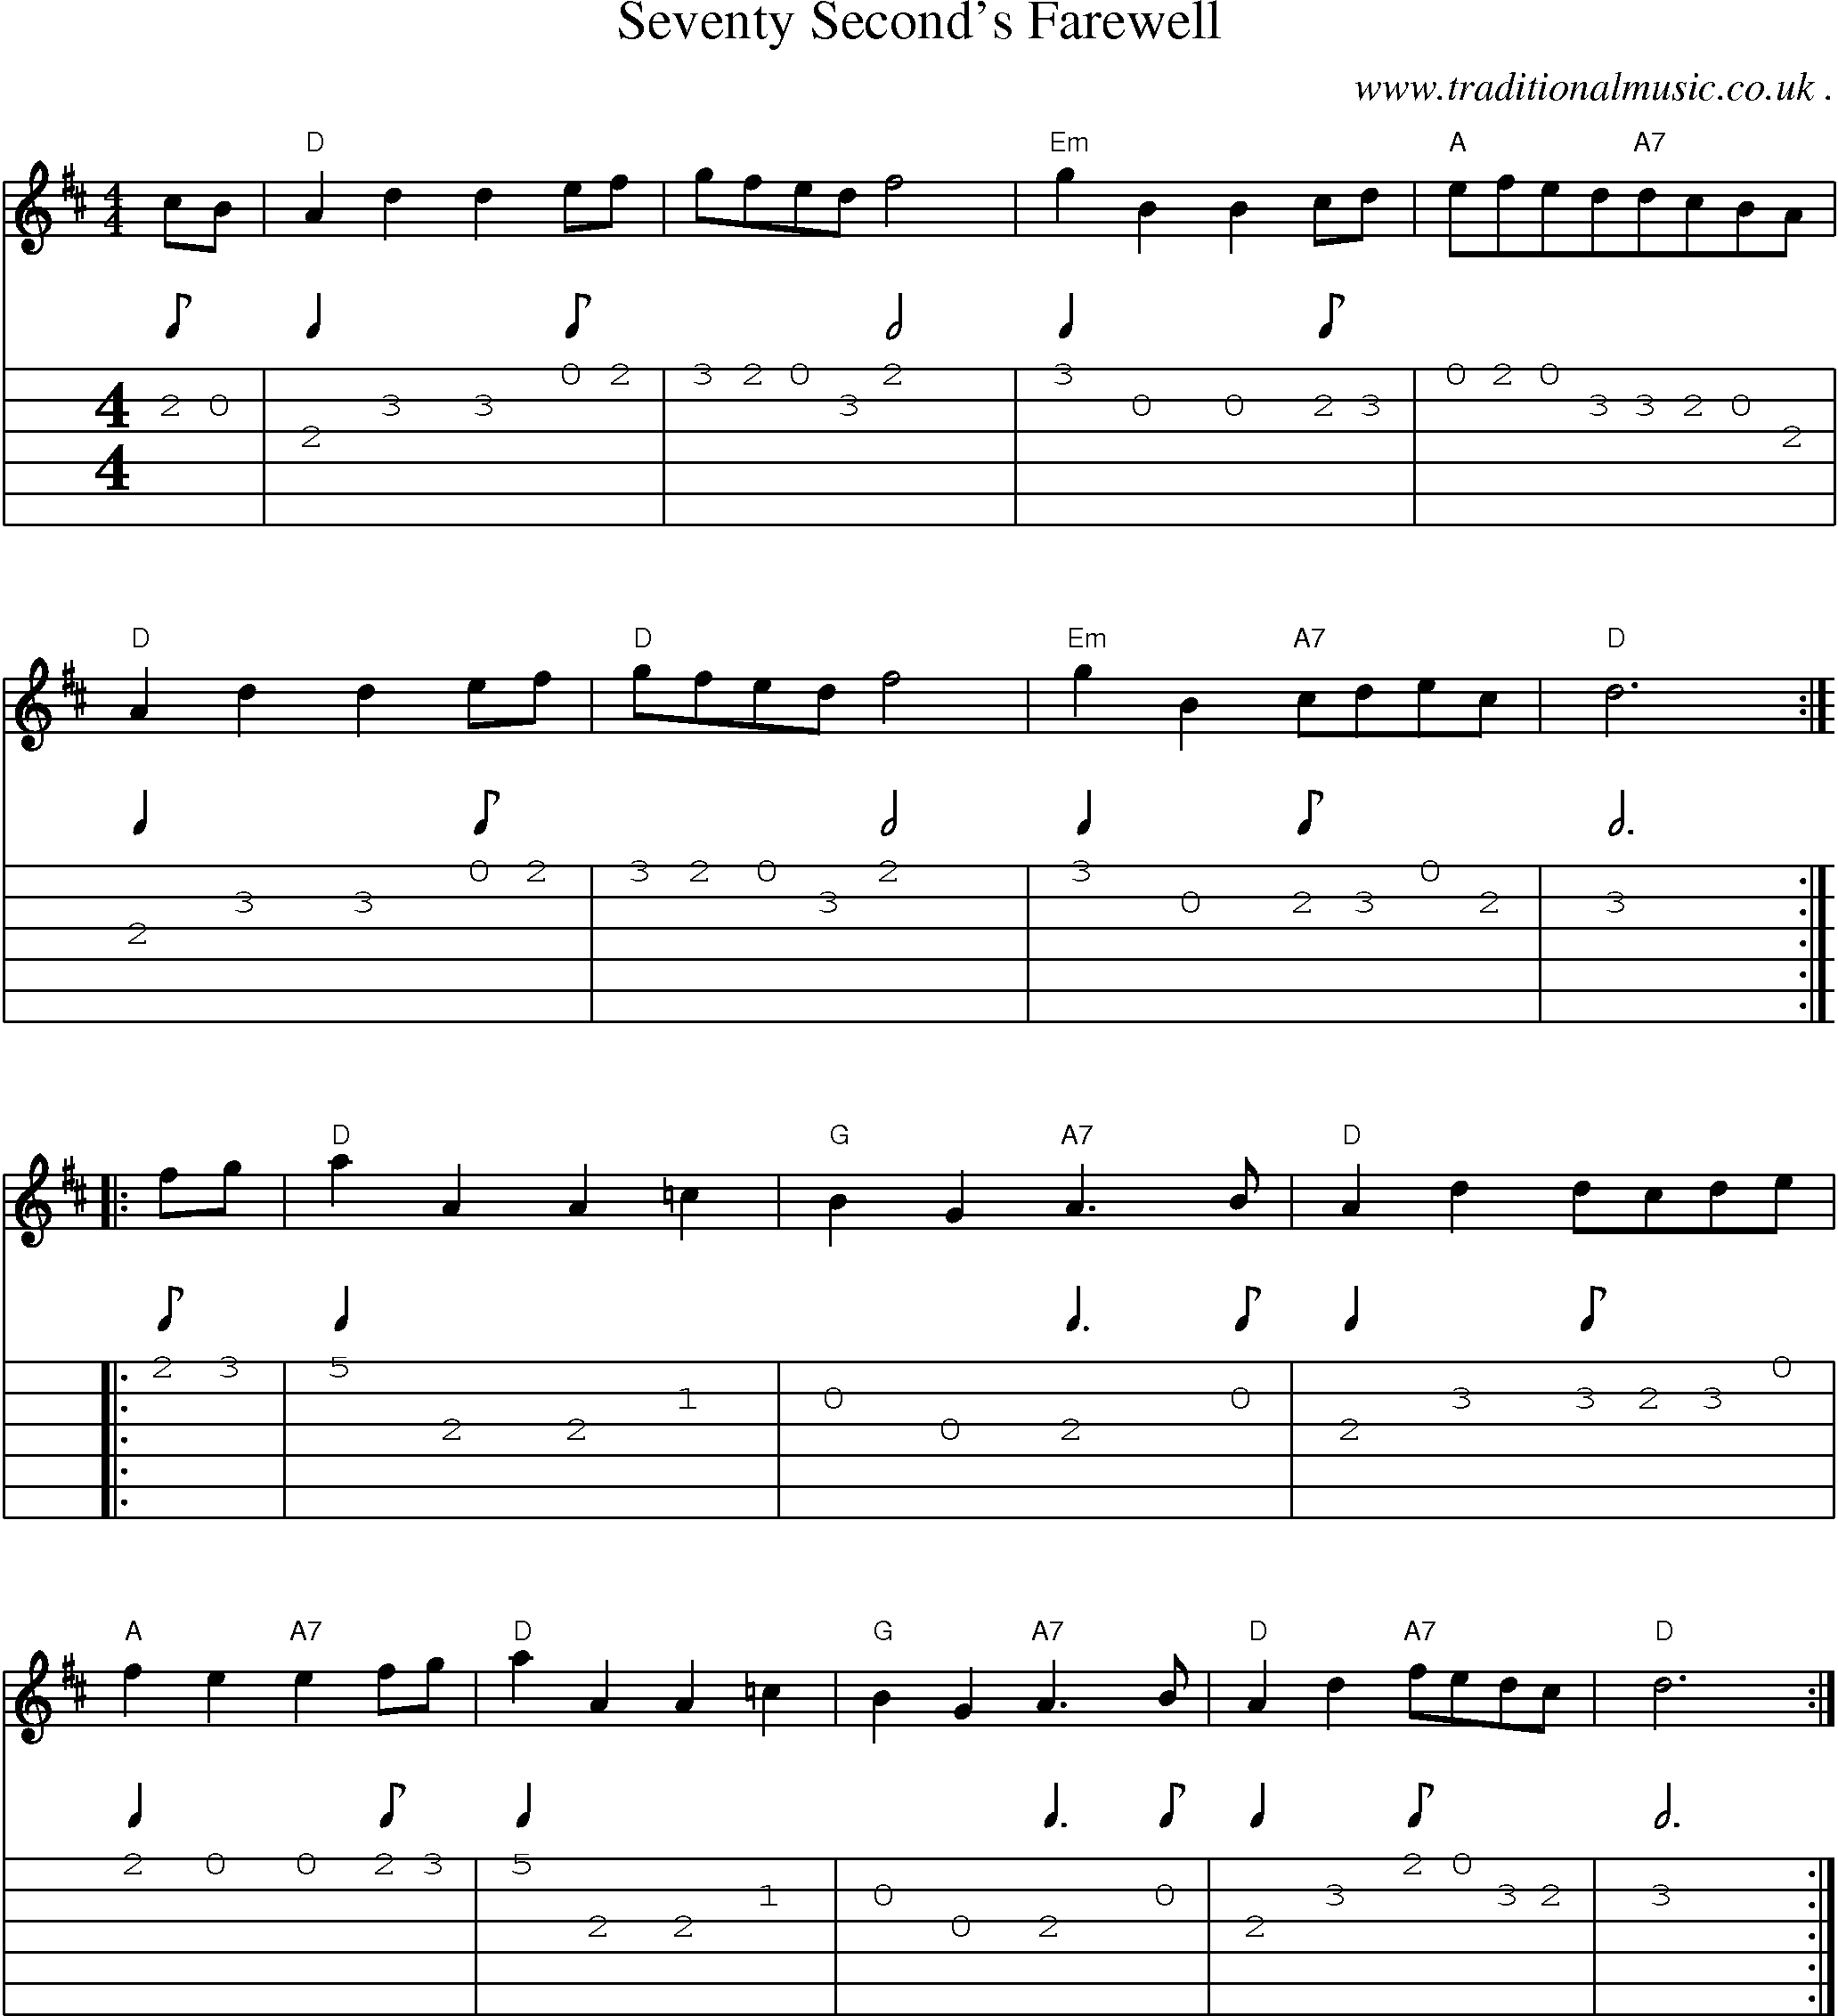 Sheet-Music and Guitar Tabs for Seventy Seconds Farewell